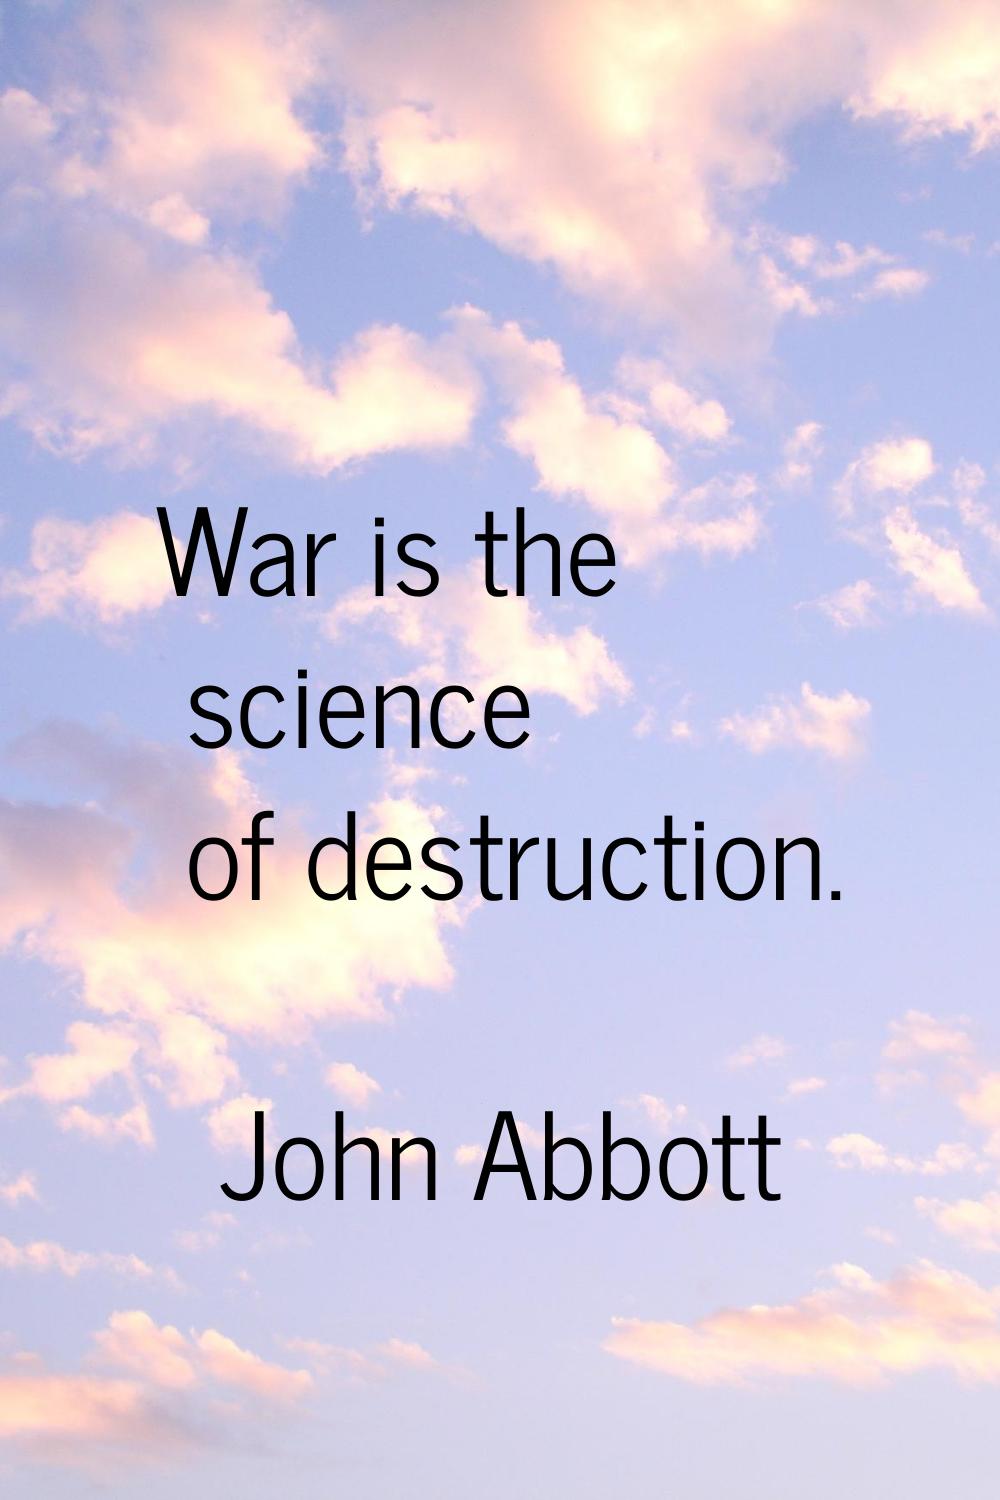 War is the science of destruction.